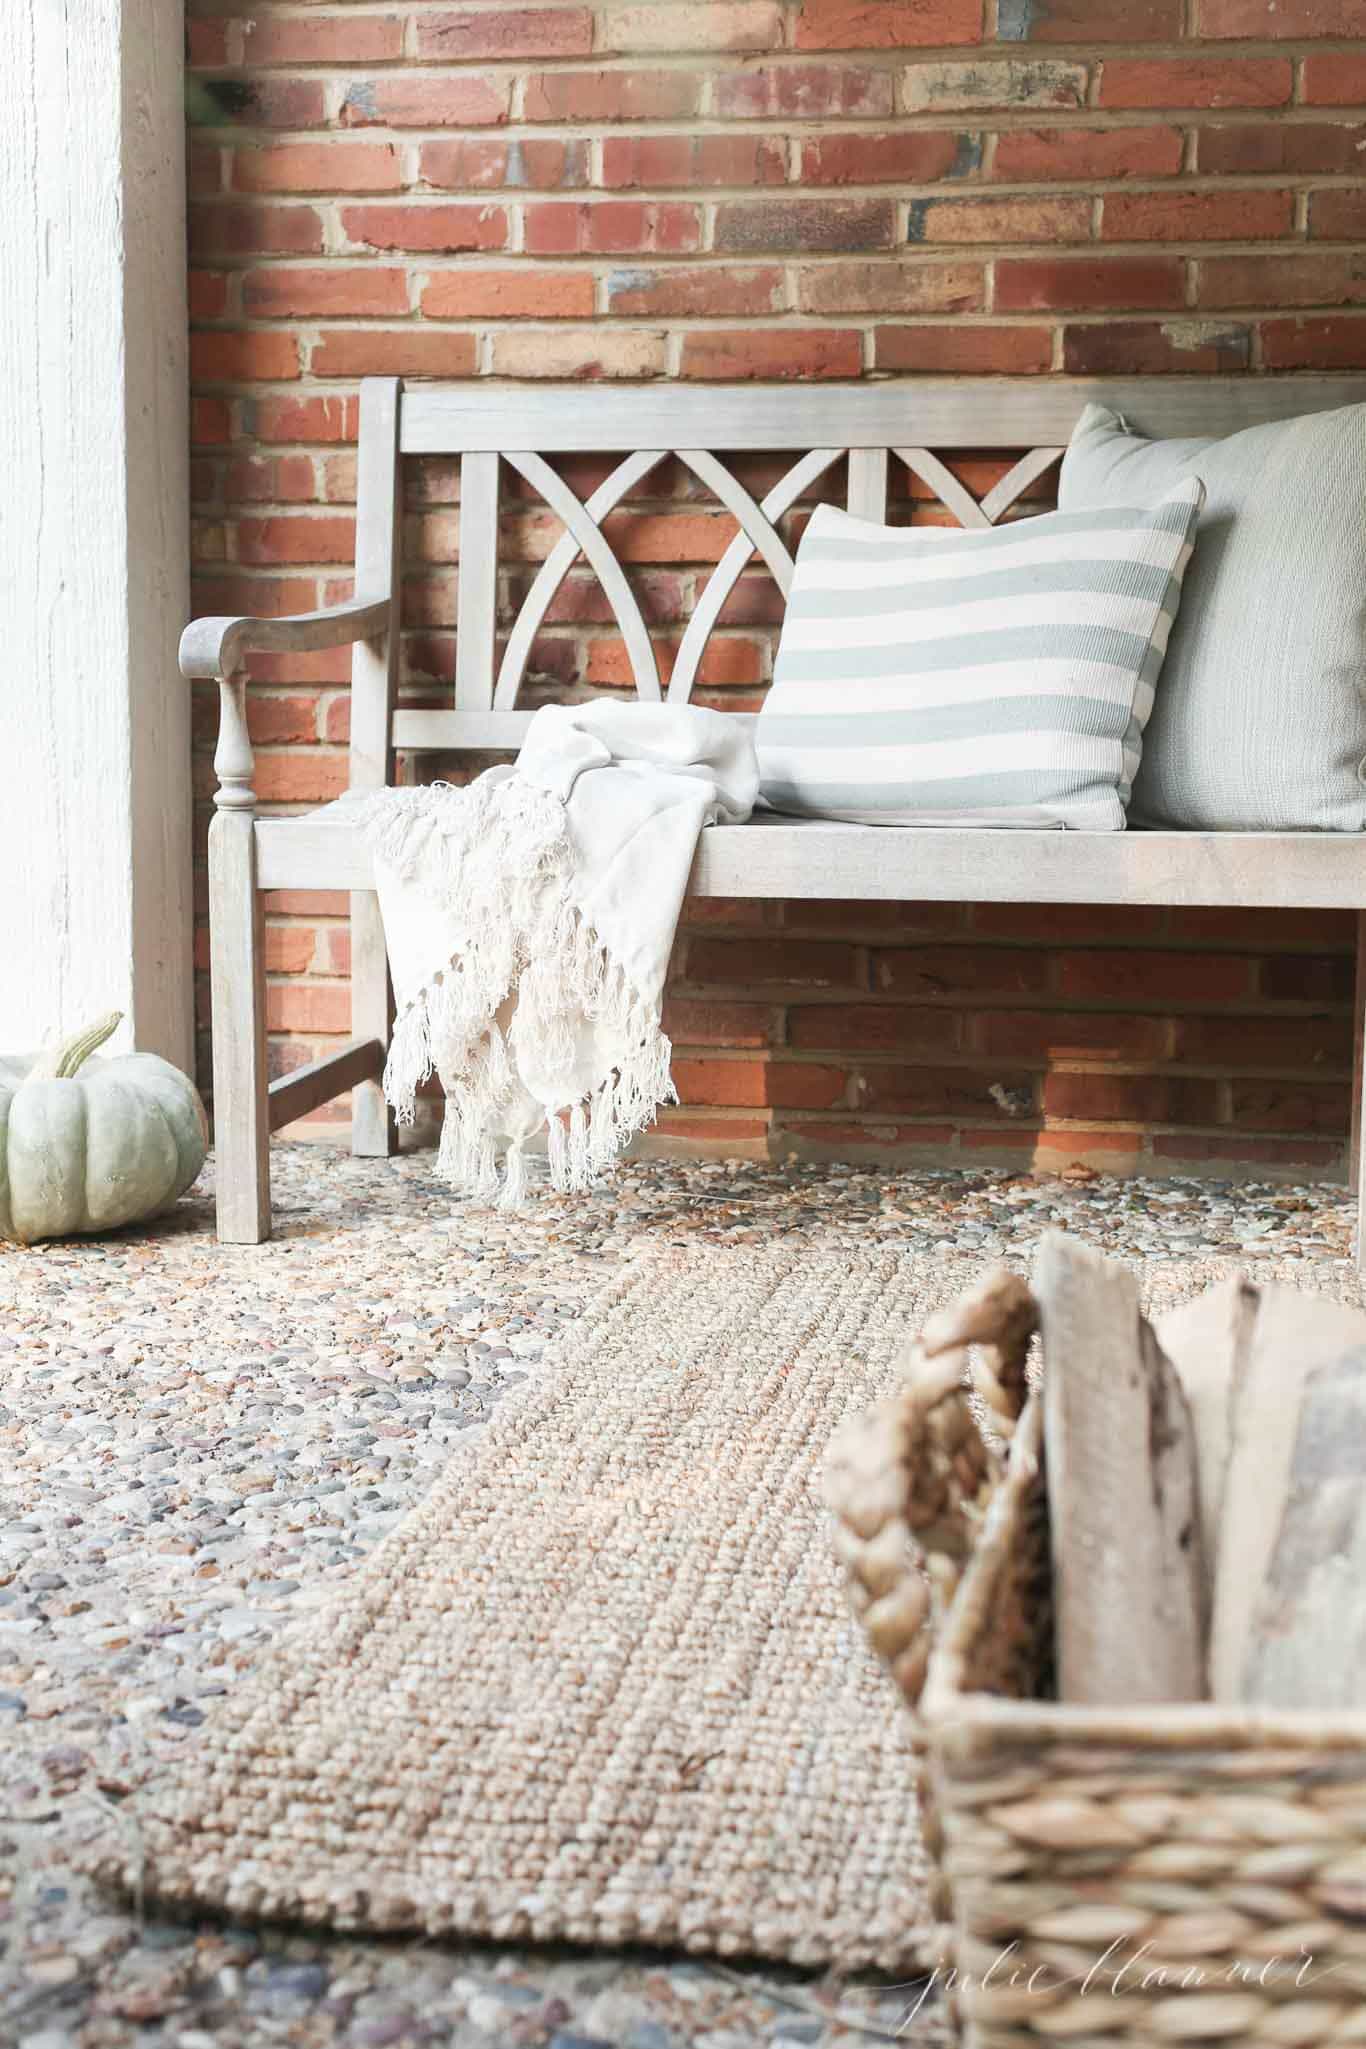 Add a bench, pillows and some throws to cozy up your fall porch